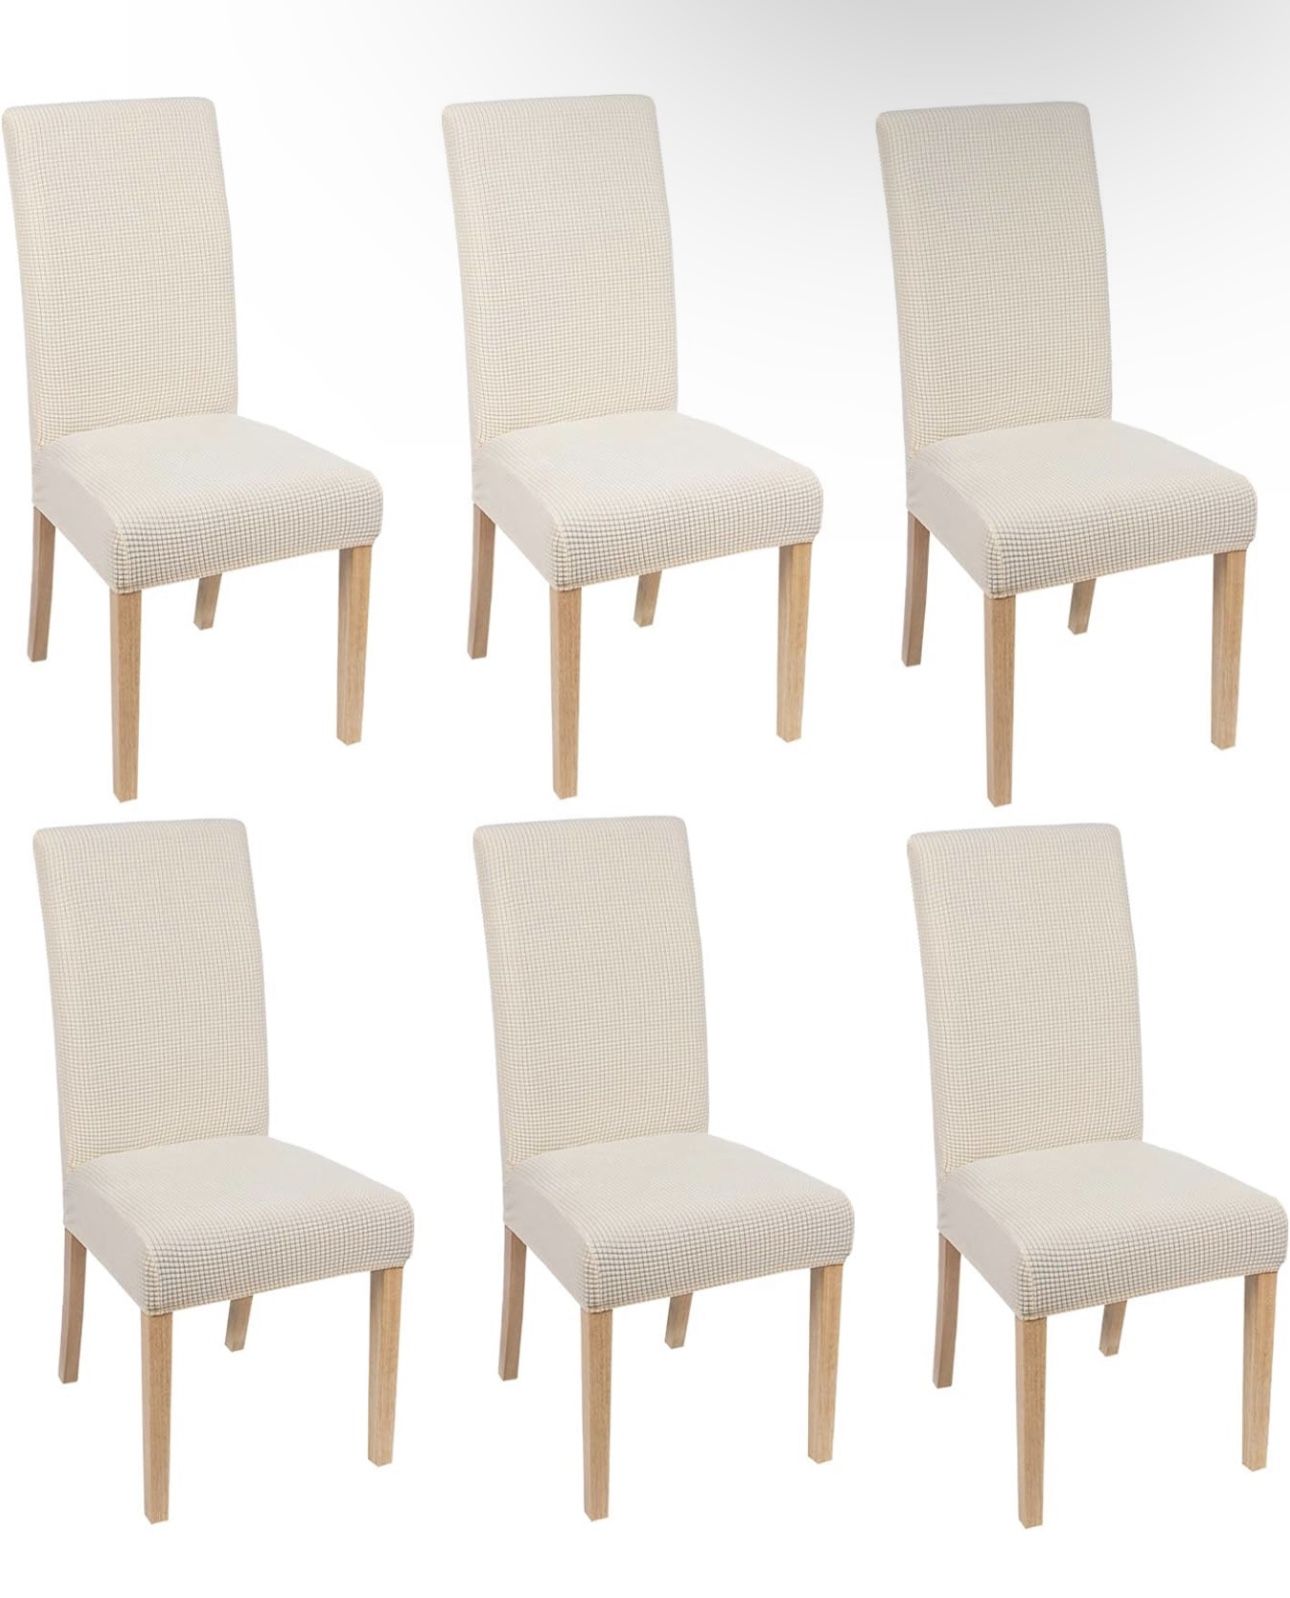 smiry Chair Covers for Dining Room,